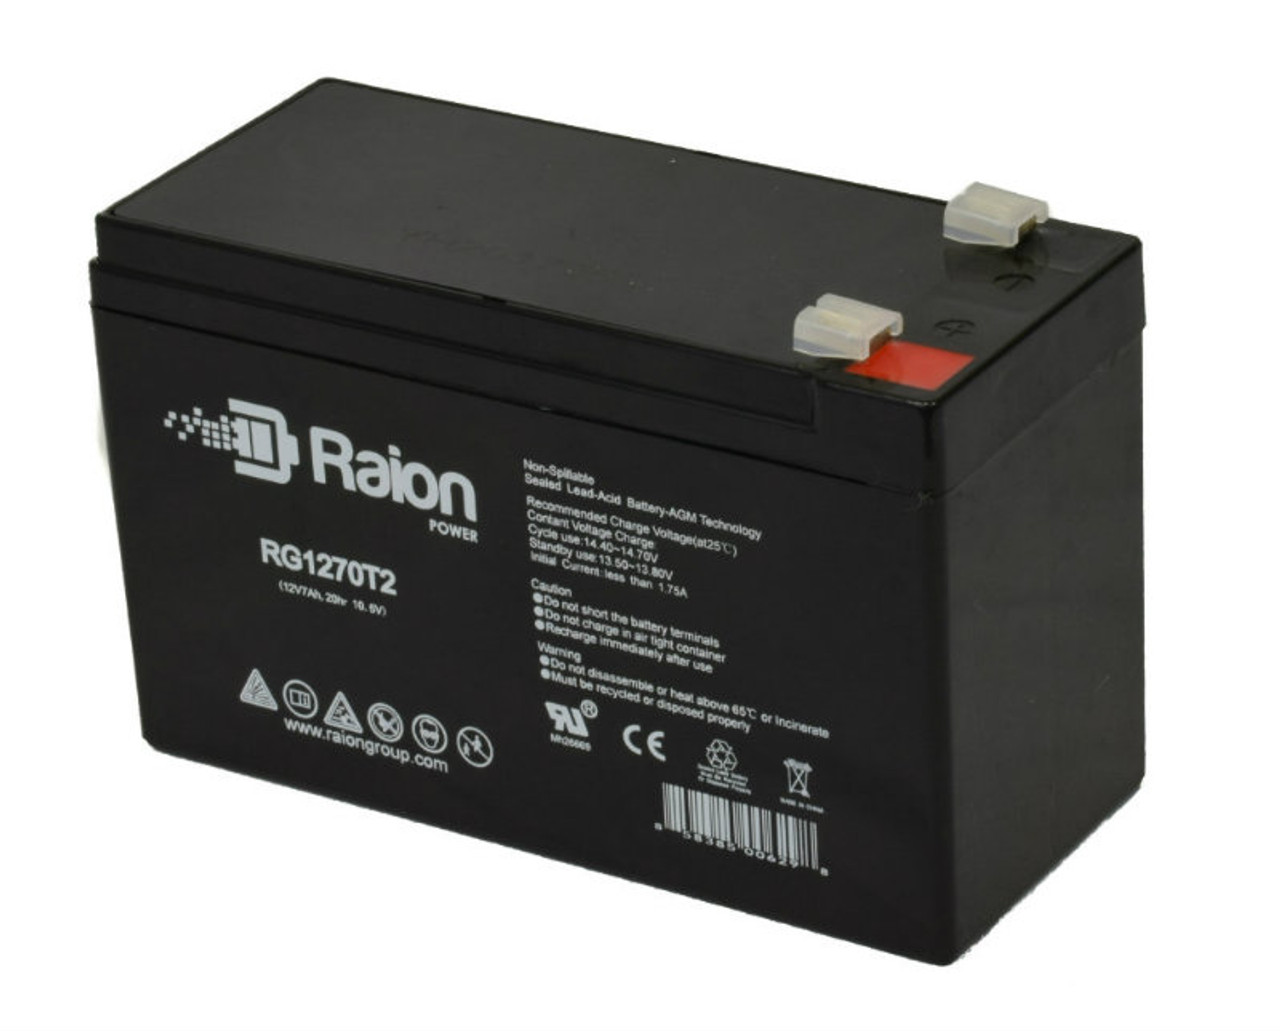 Raion Power RG1270T1 12V 7Ah Non-Spillable Replacement Battery for TLV1270F1